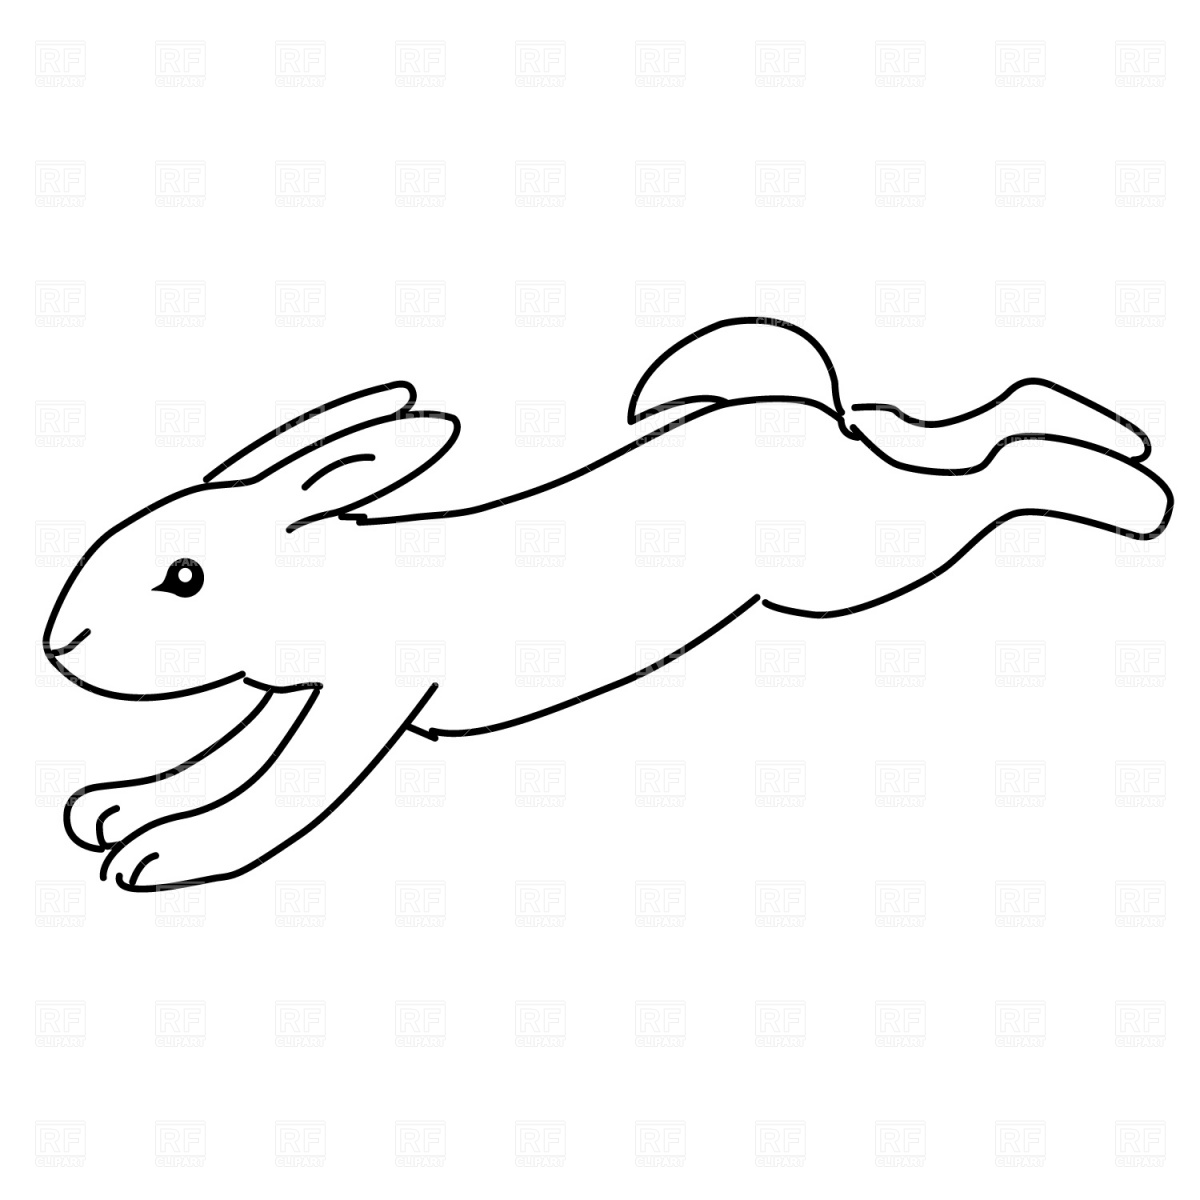 Clipart Catalog   Silhouettes Outlines   Bunny In Jump Download